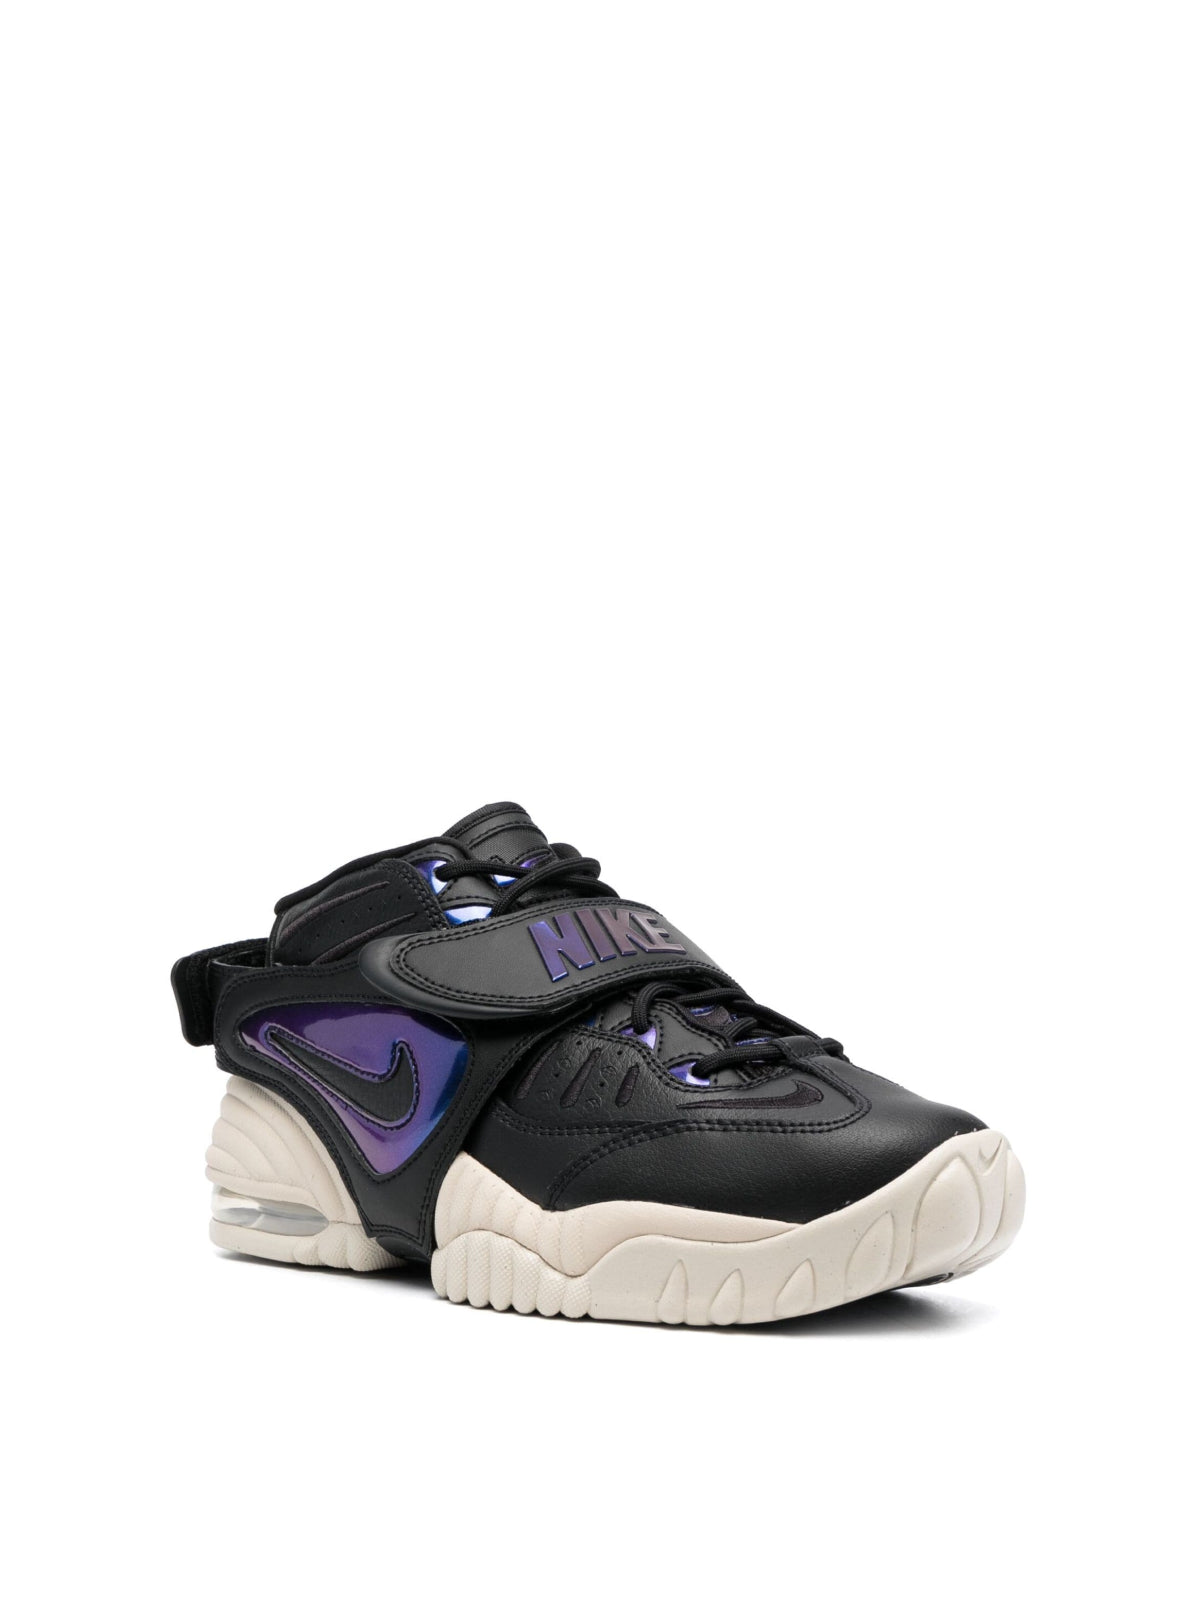 Nike-OUTLET-SALE-Air Adjust Force 2023 Sneakers-ARCHIVIST